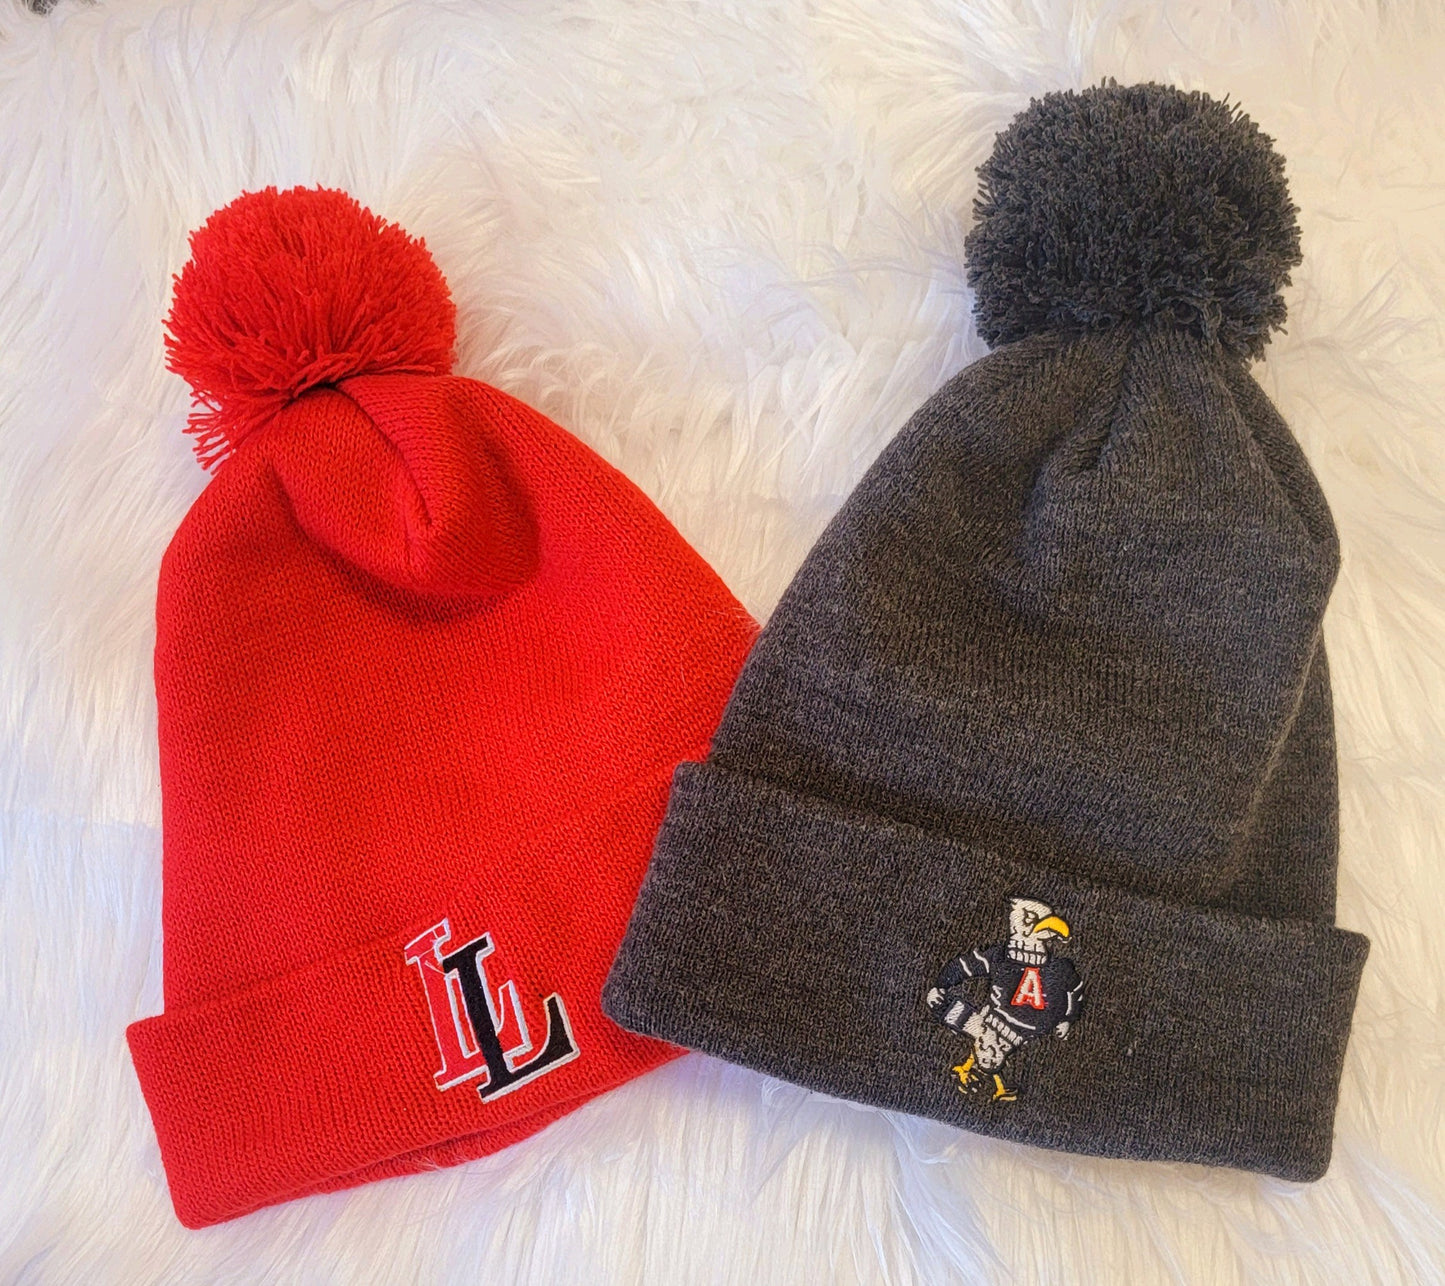 Embroidered Beanies!